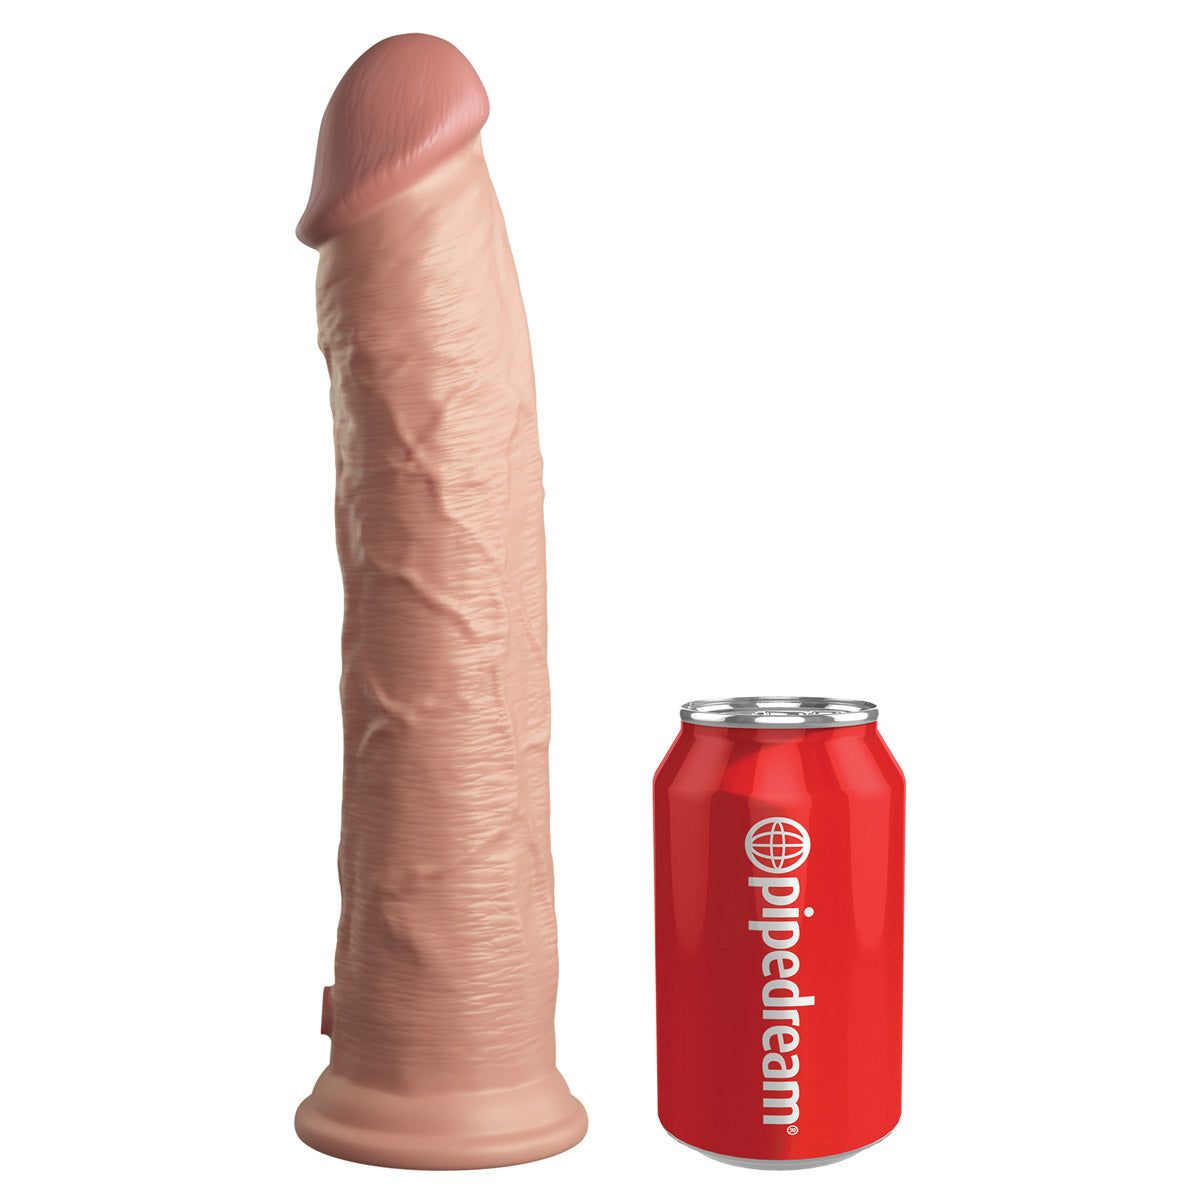 King Cock Elite 11" Silicone Dual Density Cock - Light - Thorn & Feather